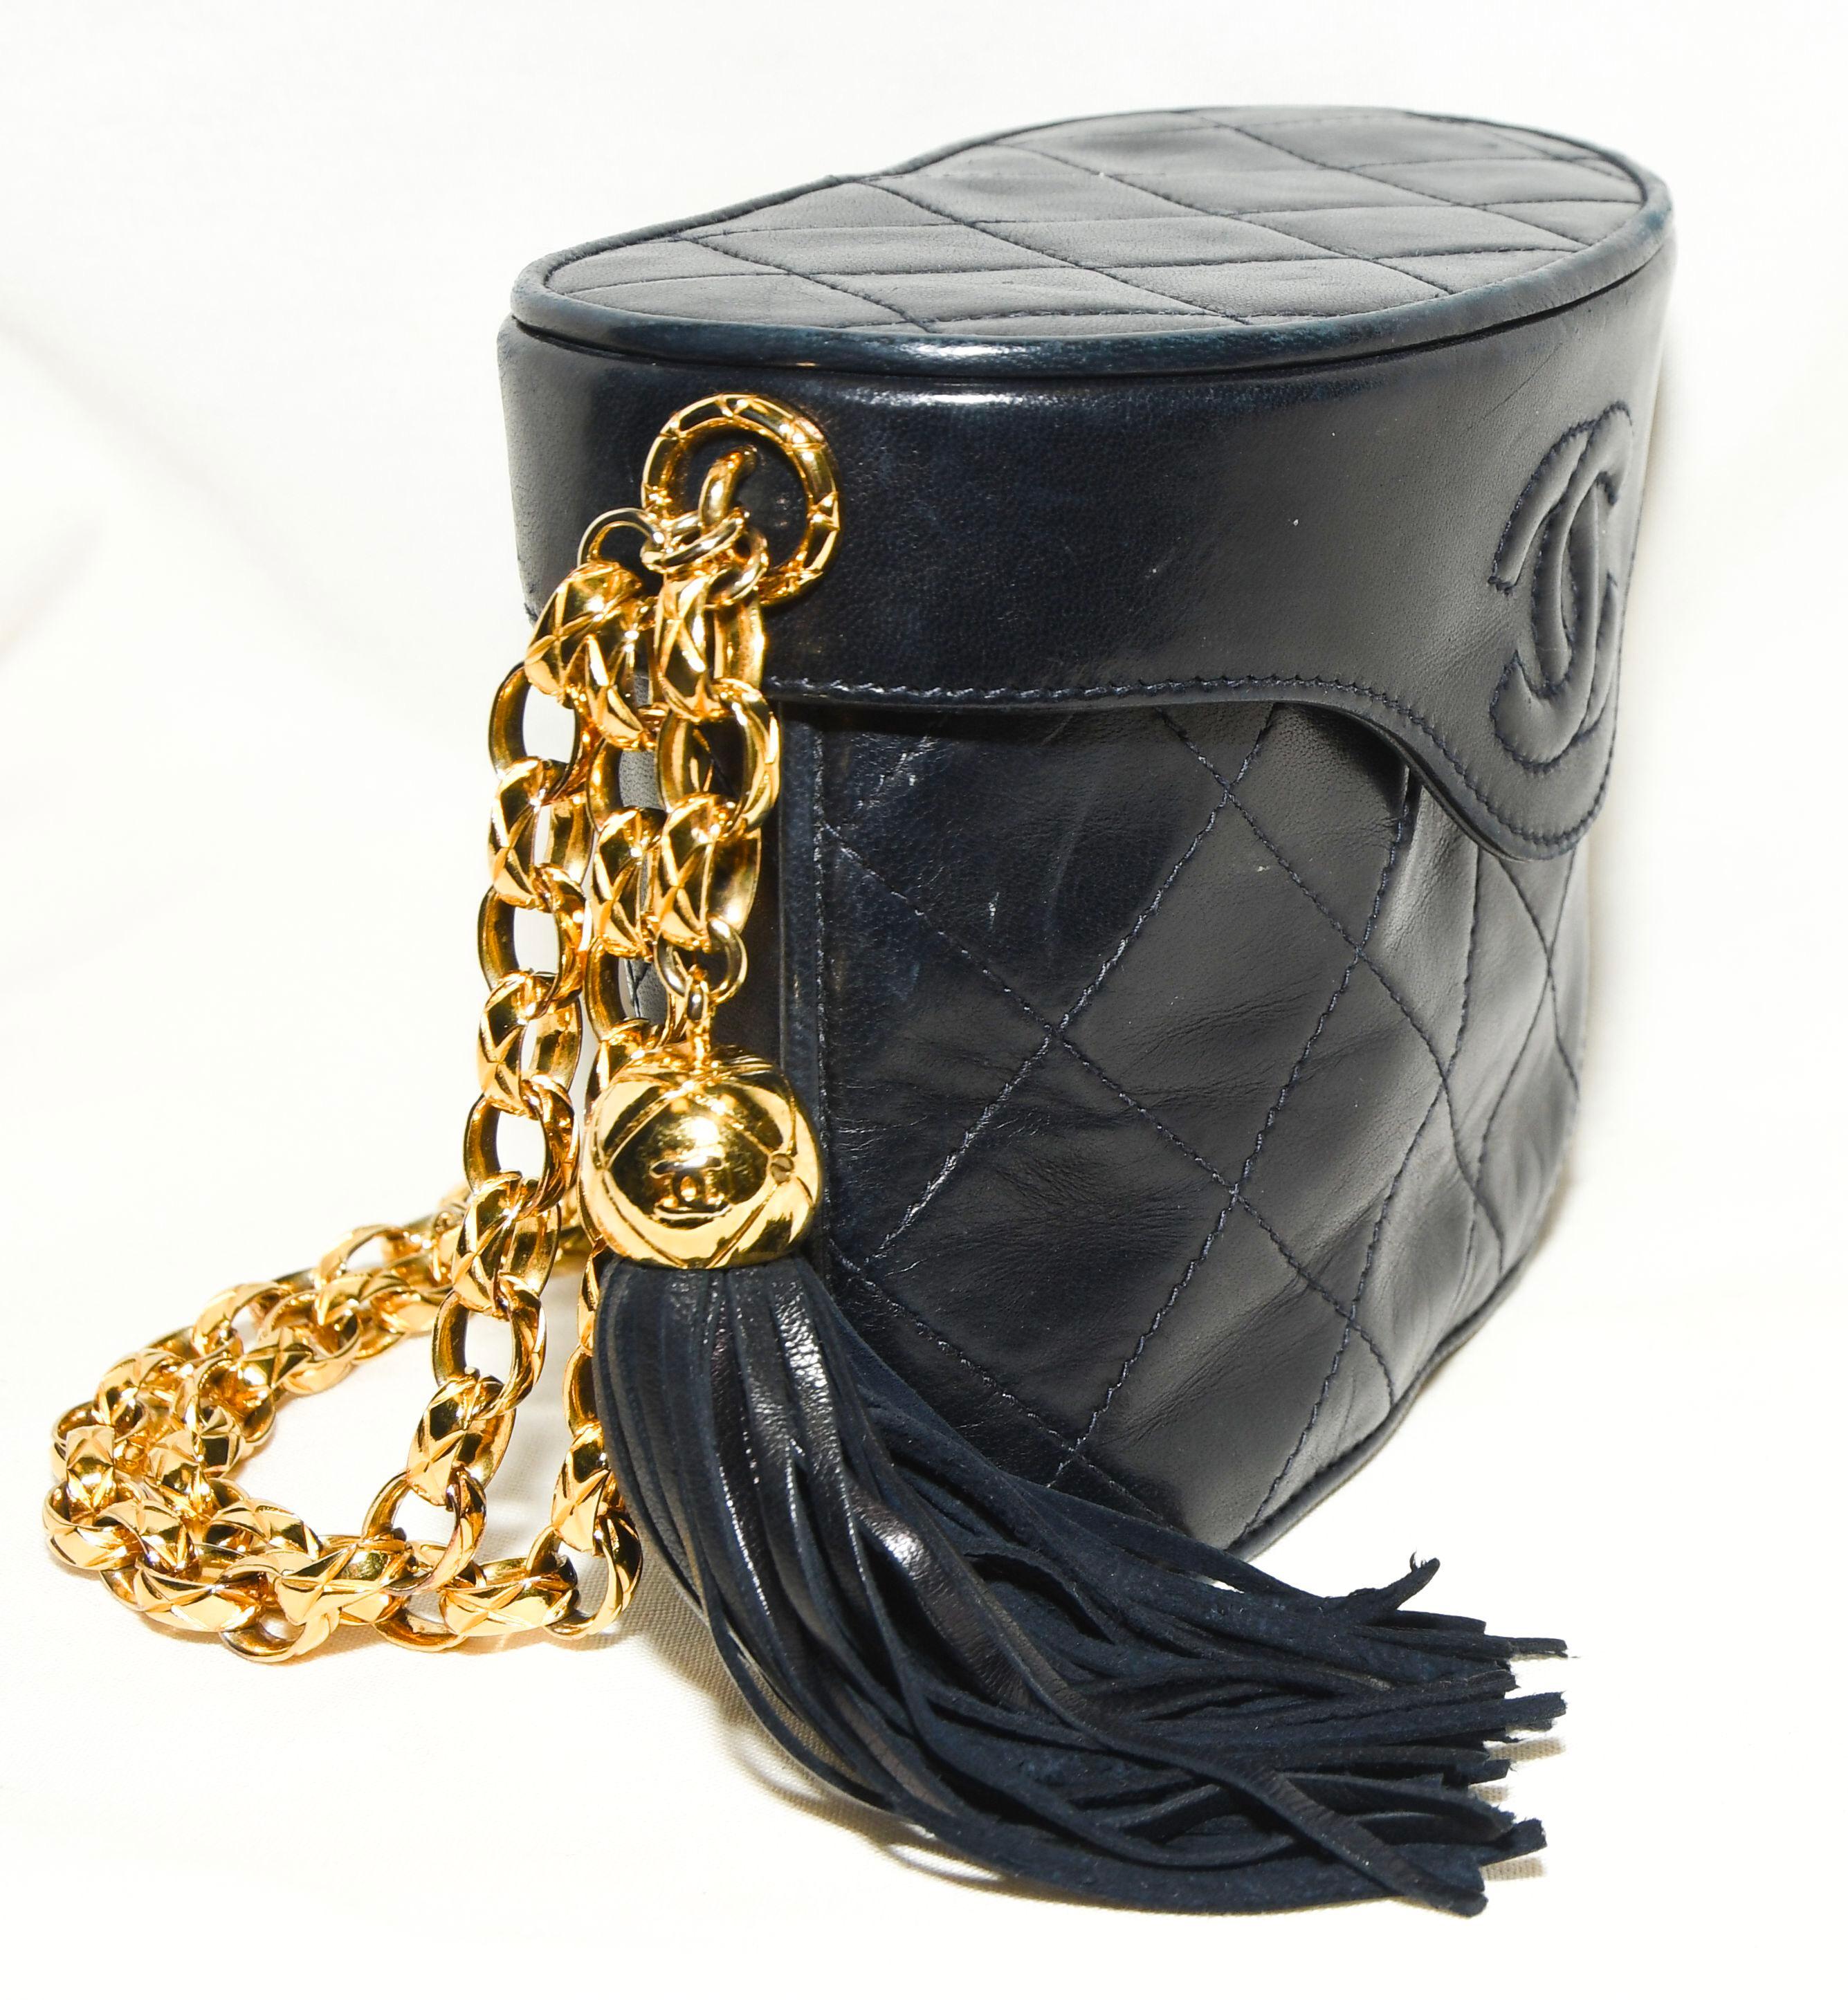 Chanel Binocular Bag crafted in diamond quilted lambskin leather. A long tassel hangs from the magnetic top flap in the shape of binoculars.  This bag is lined in black leather and includes single pocket on the interior.  A gold tone intricate